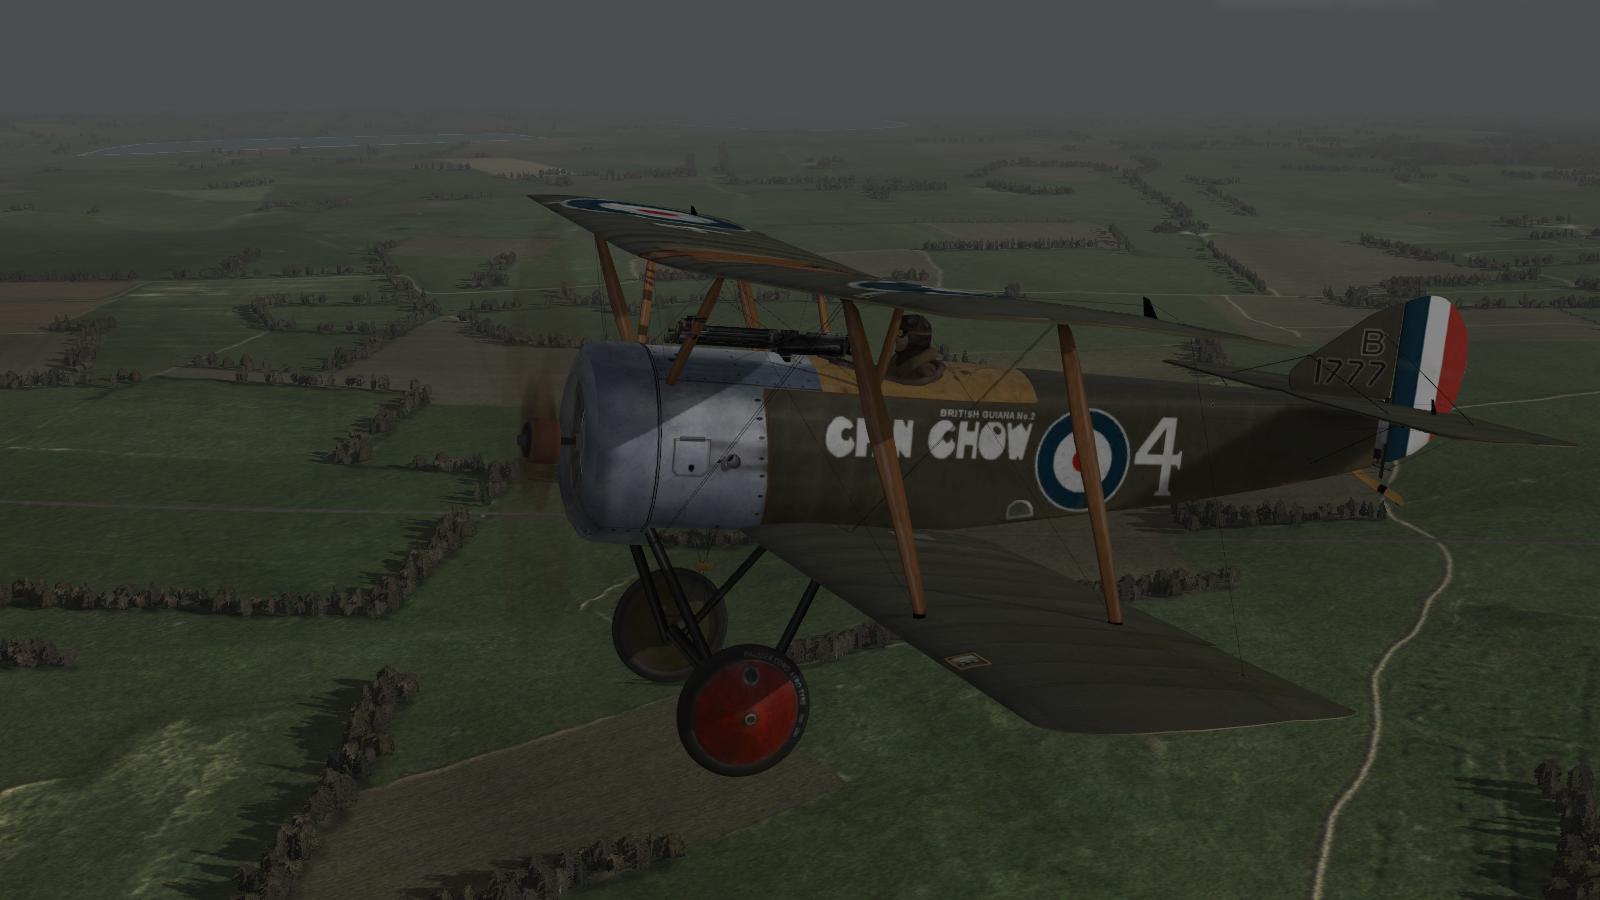 Wings over Flanders Fields - Sopwith Pup, Arthur Gould Lee, 46 Squadron, mid-1917